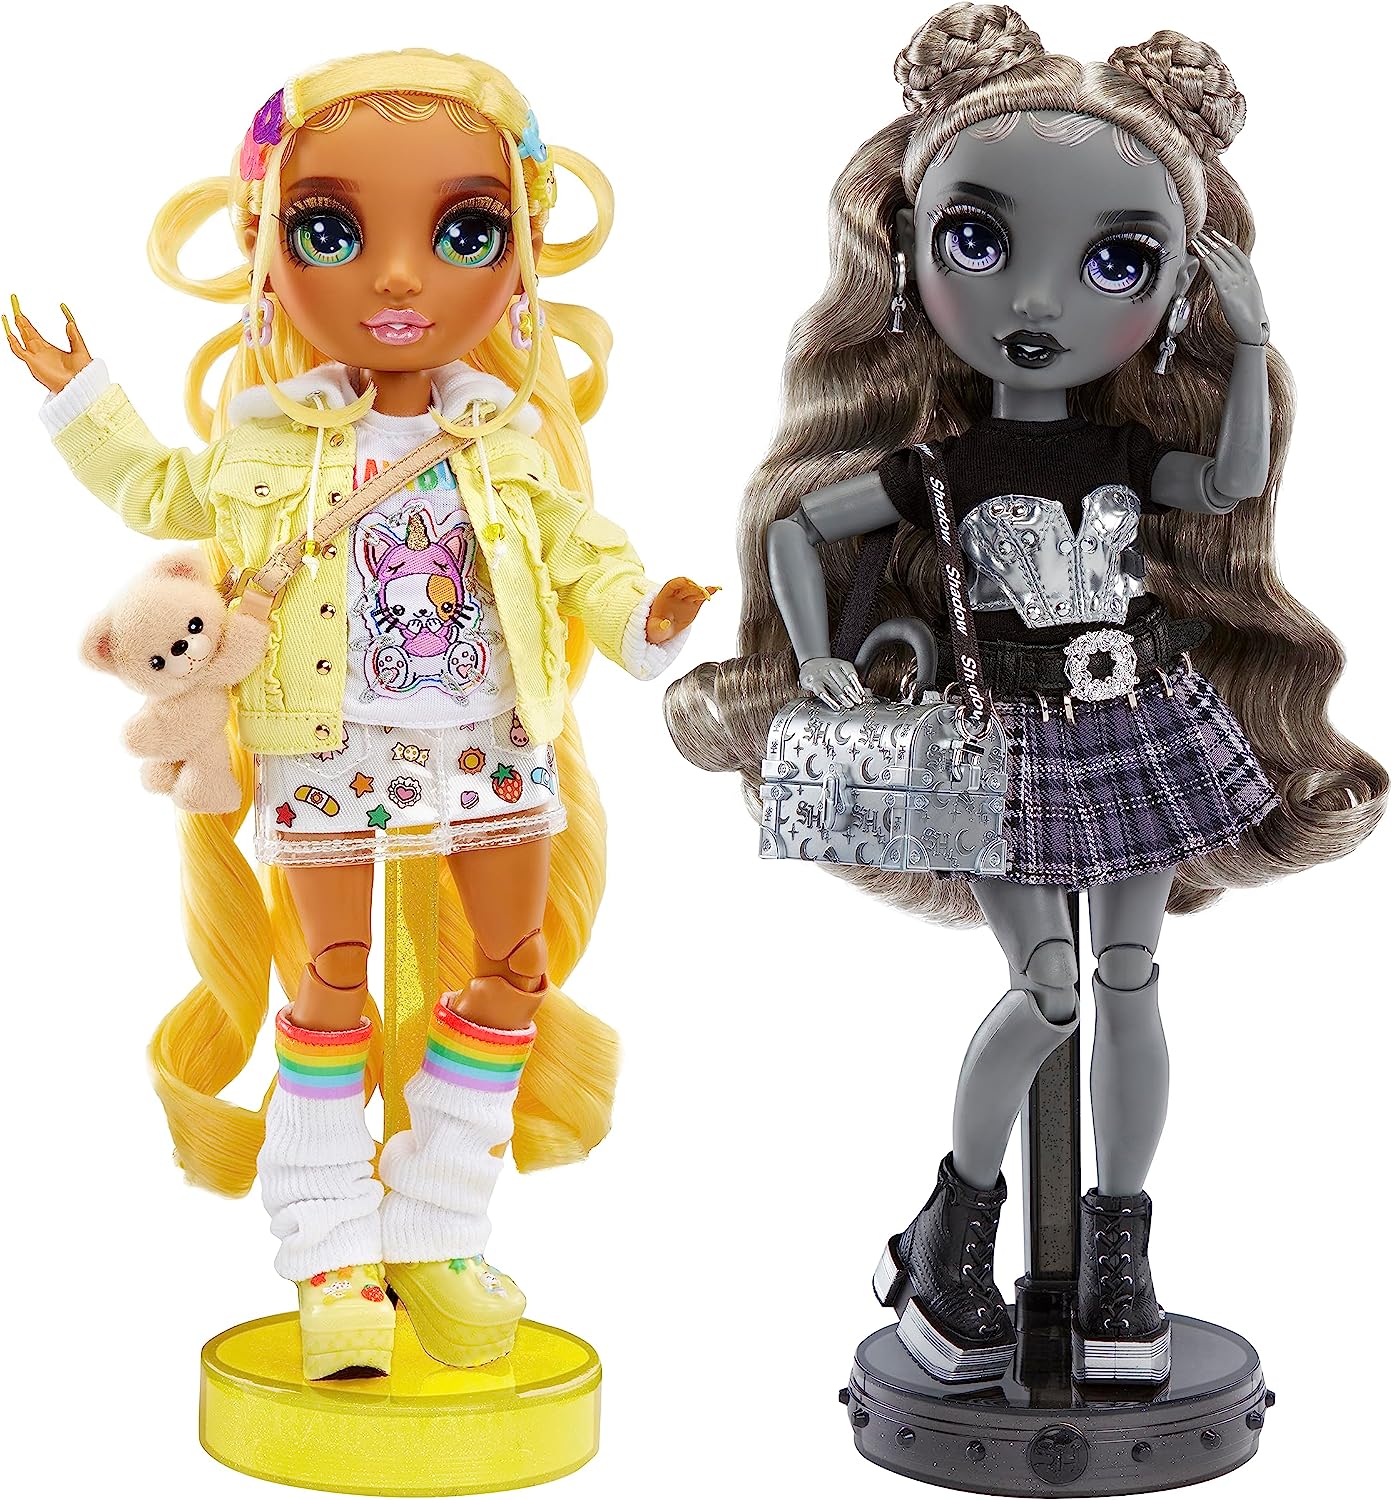 Shadow High Special Edition Twins Naomi & Veronica Storm Fashion Dolls  2-Pack 